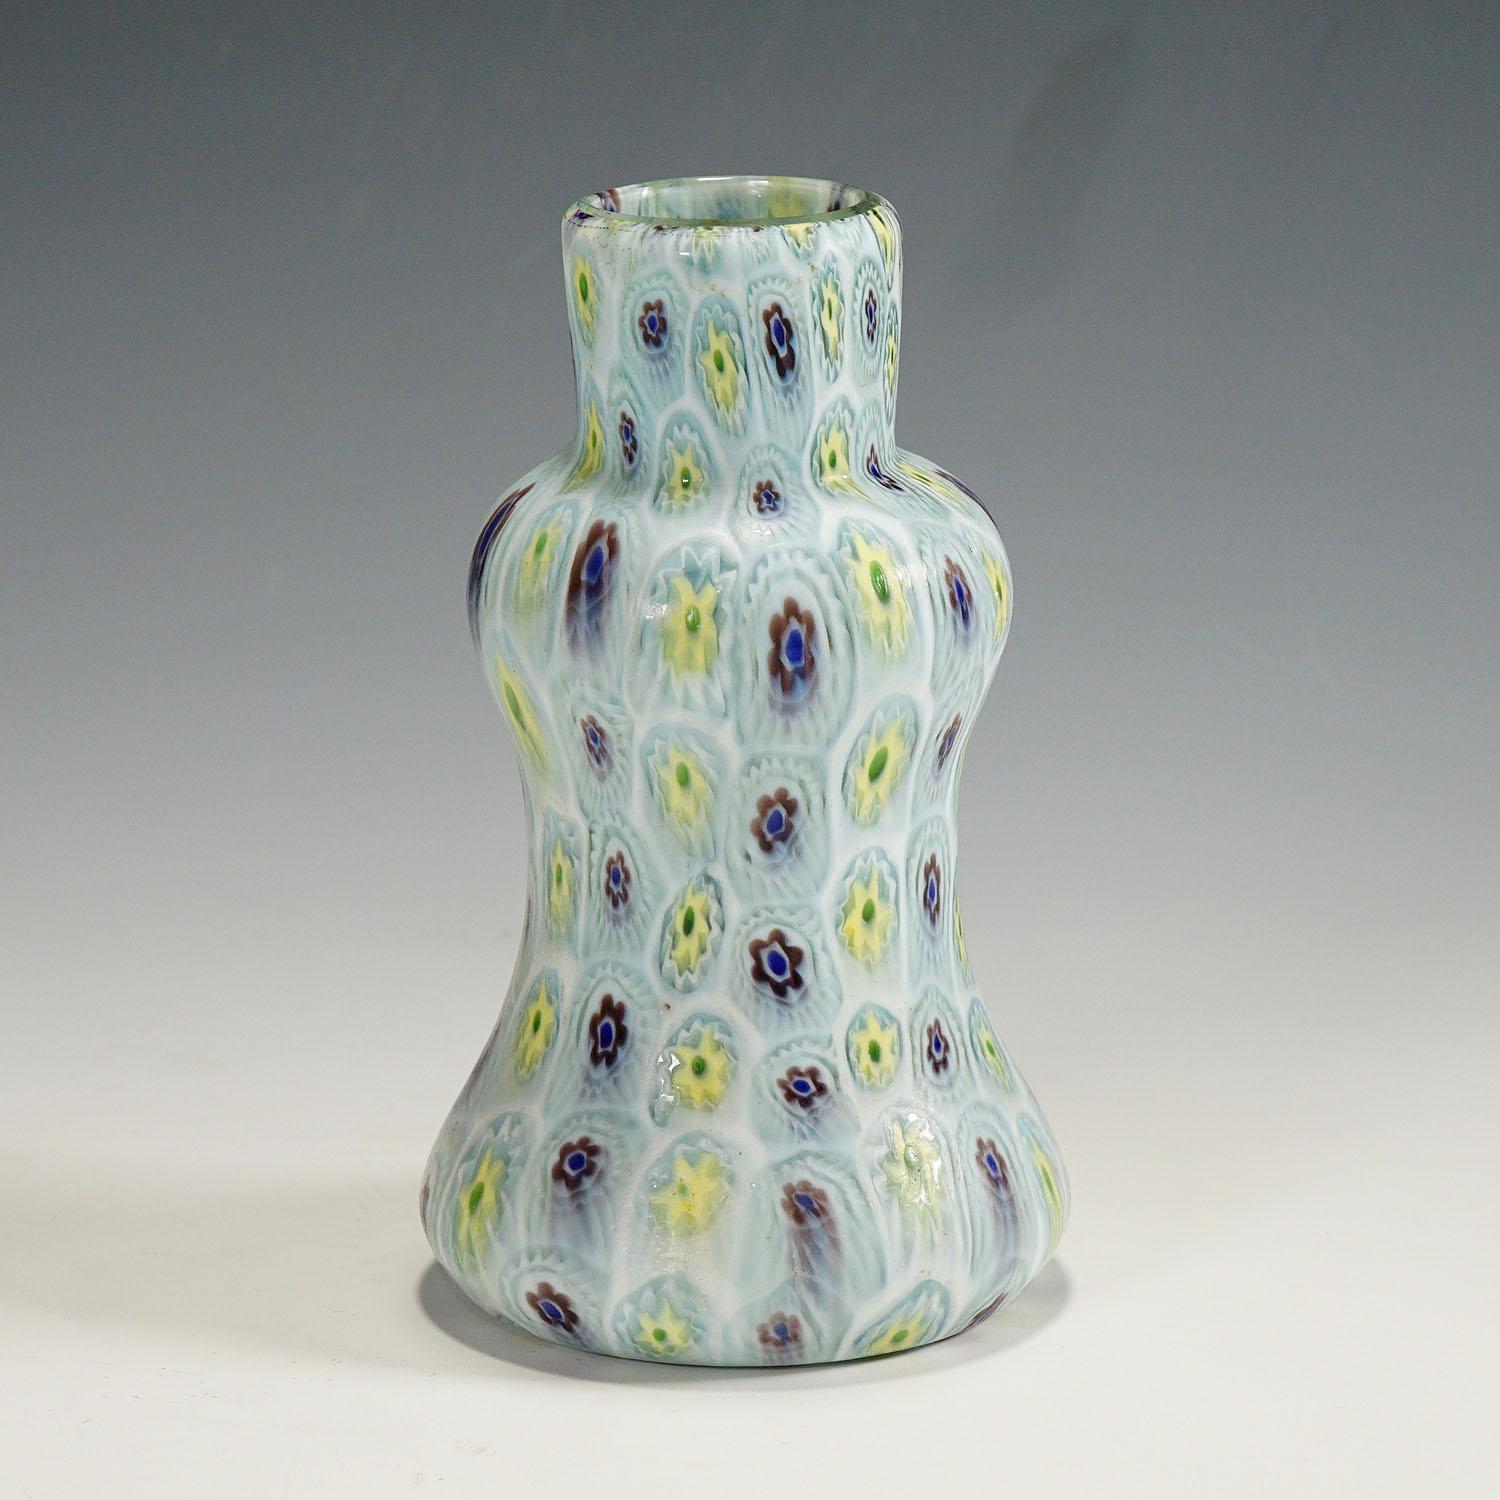 A double pumpkin shaped murrine glass vase, manufactured by Vetreria Fratelli Toso around 1910. The vase is executed with polychrome multicoloured millefiori murrines arranged in vertical rows and has a acid etched matte finish. An authentic example